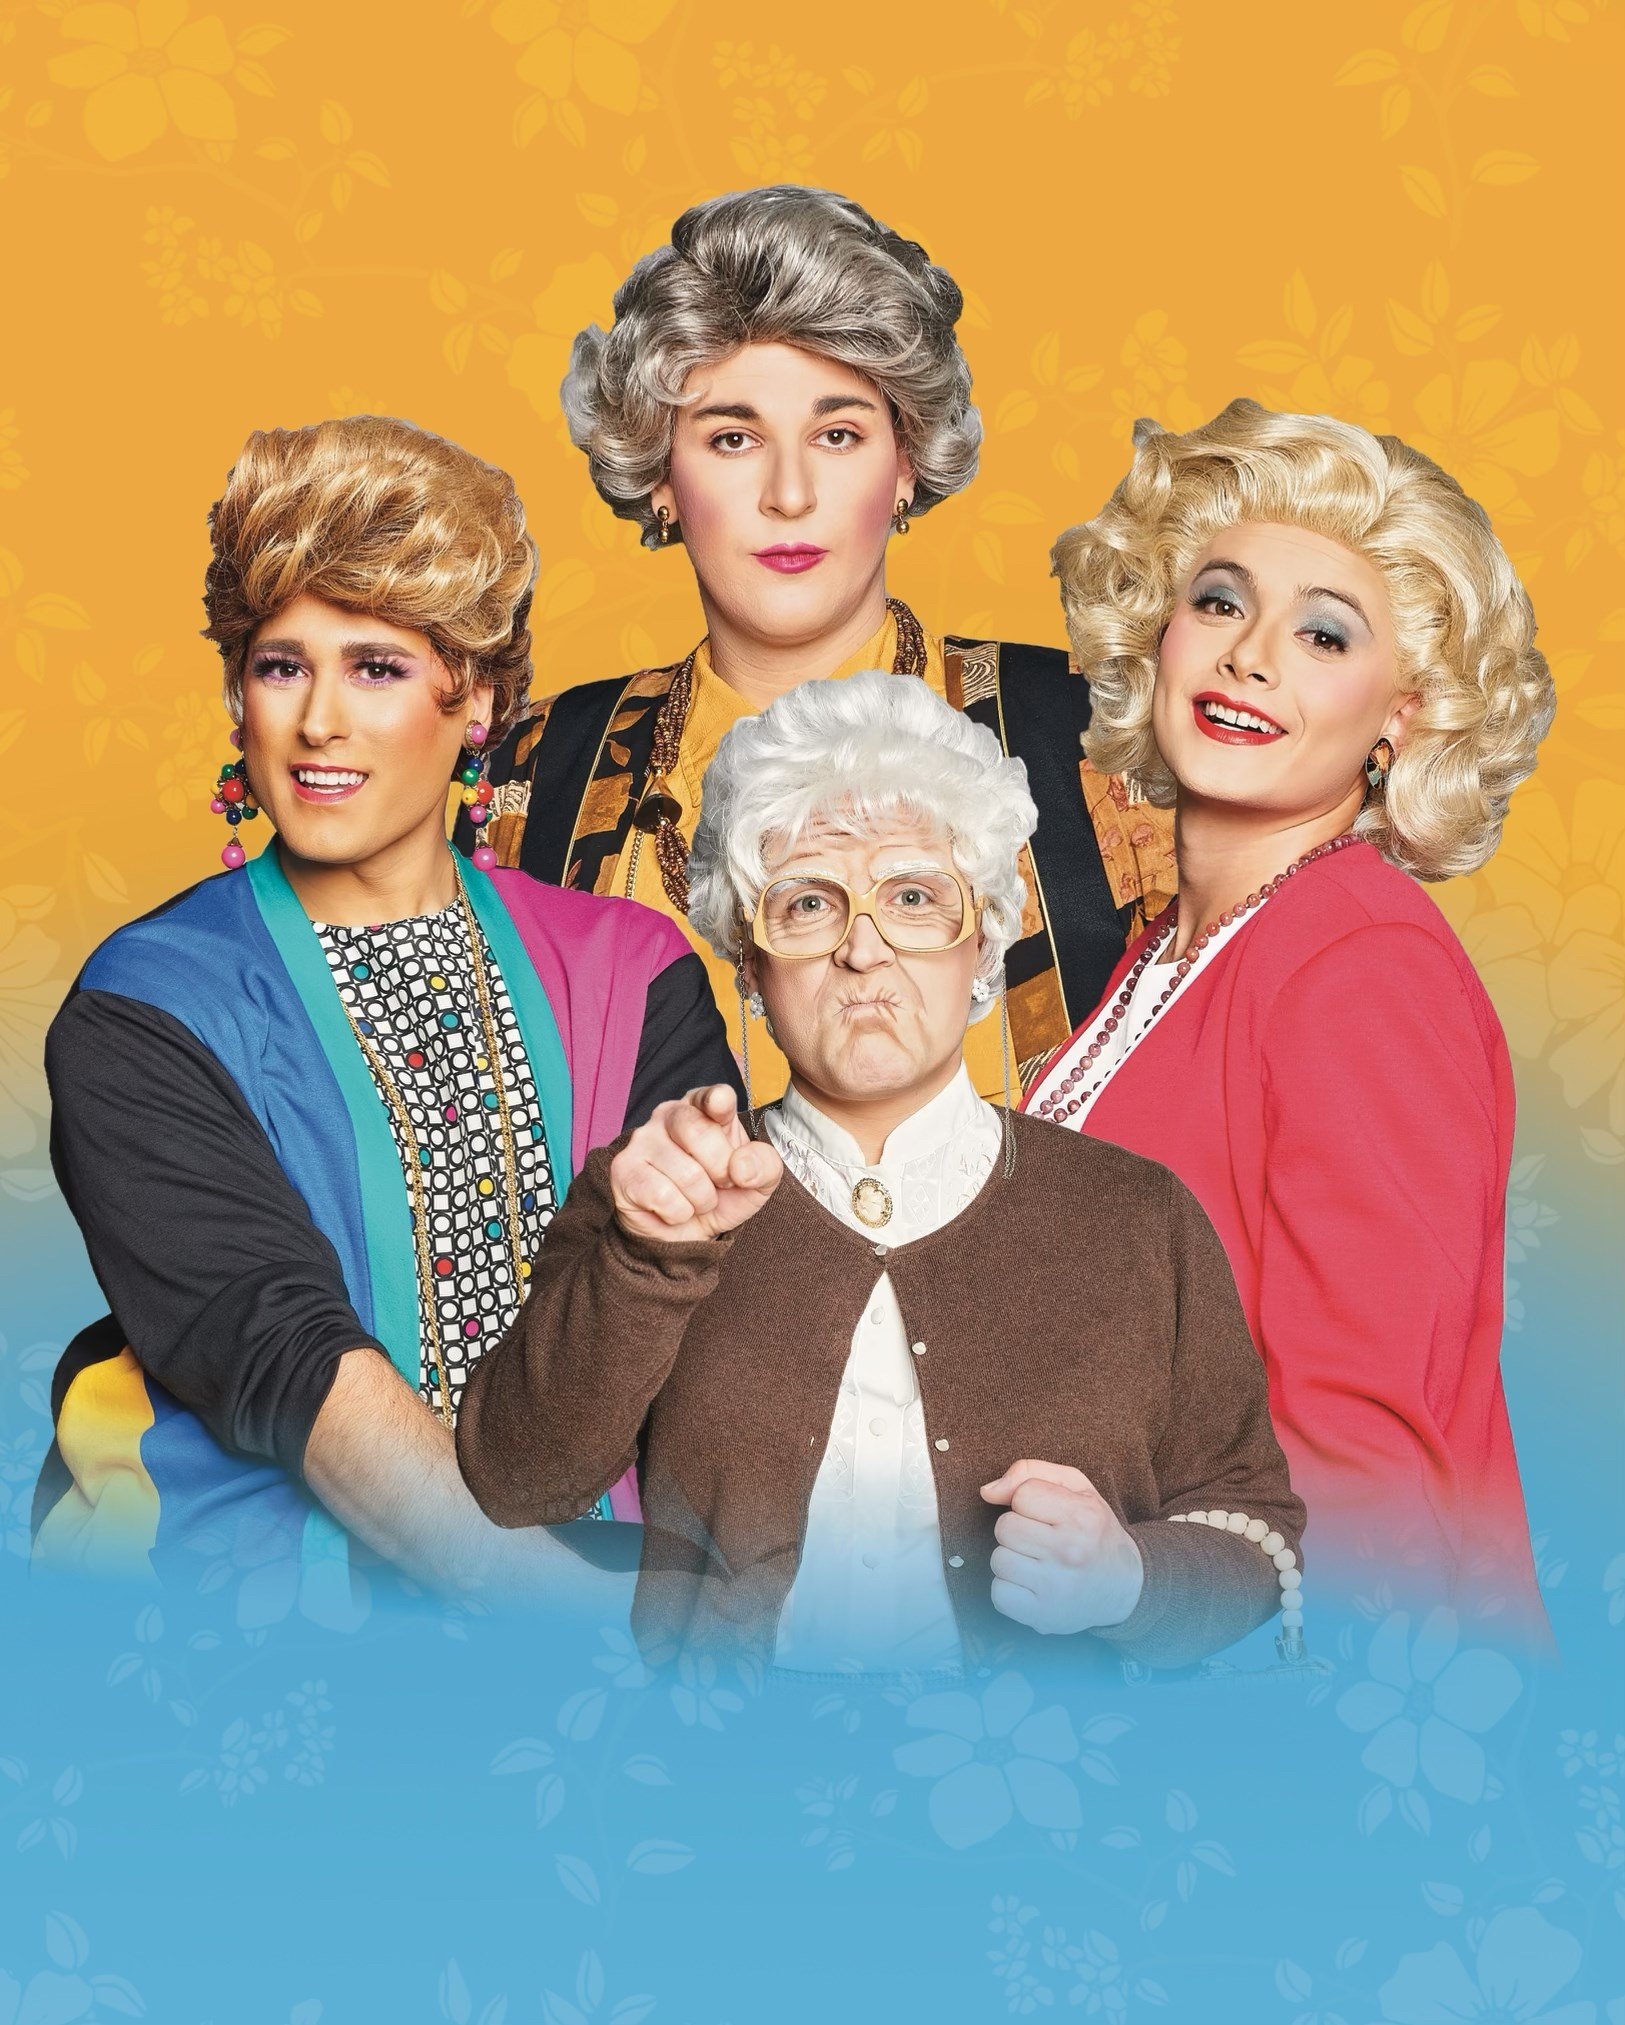 Golden Girls: The Laughs Continue Headed to Erie's Warner Theatre this Spring